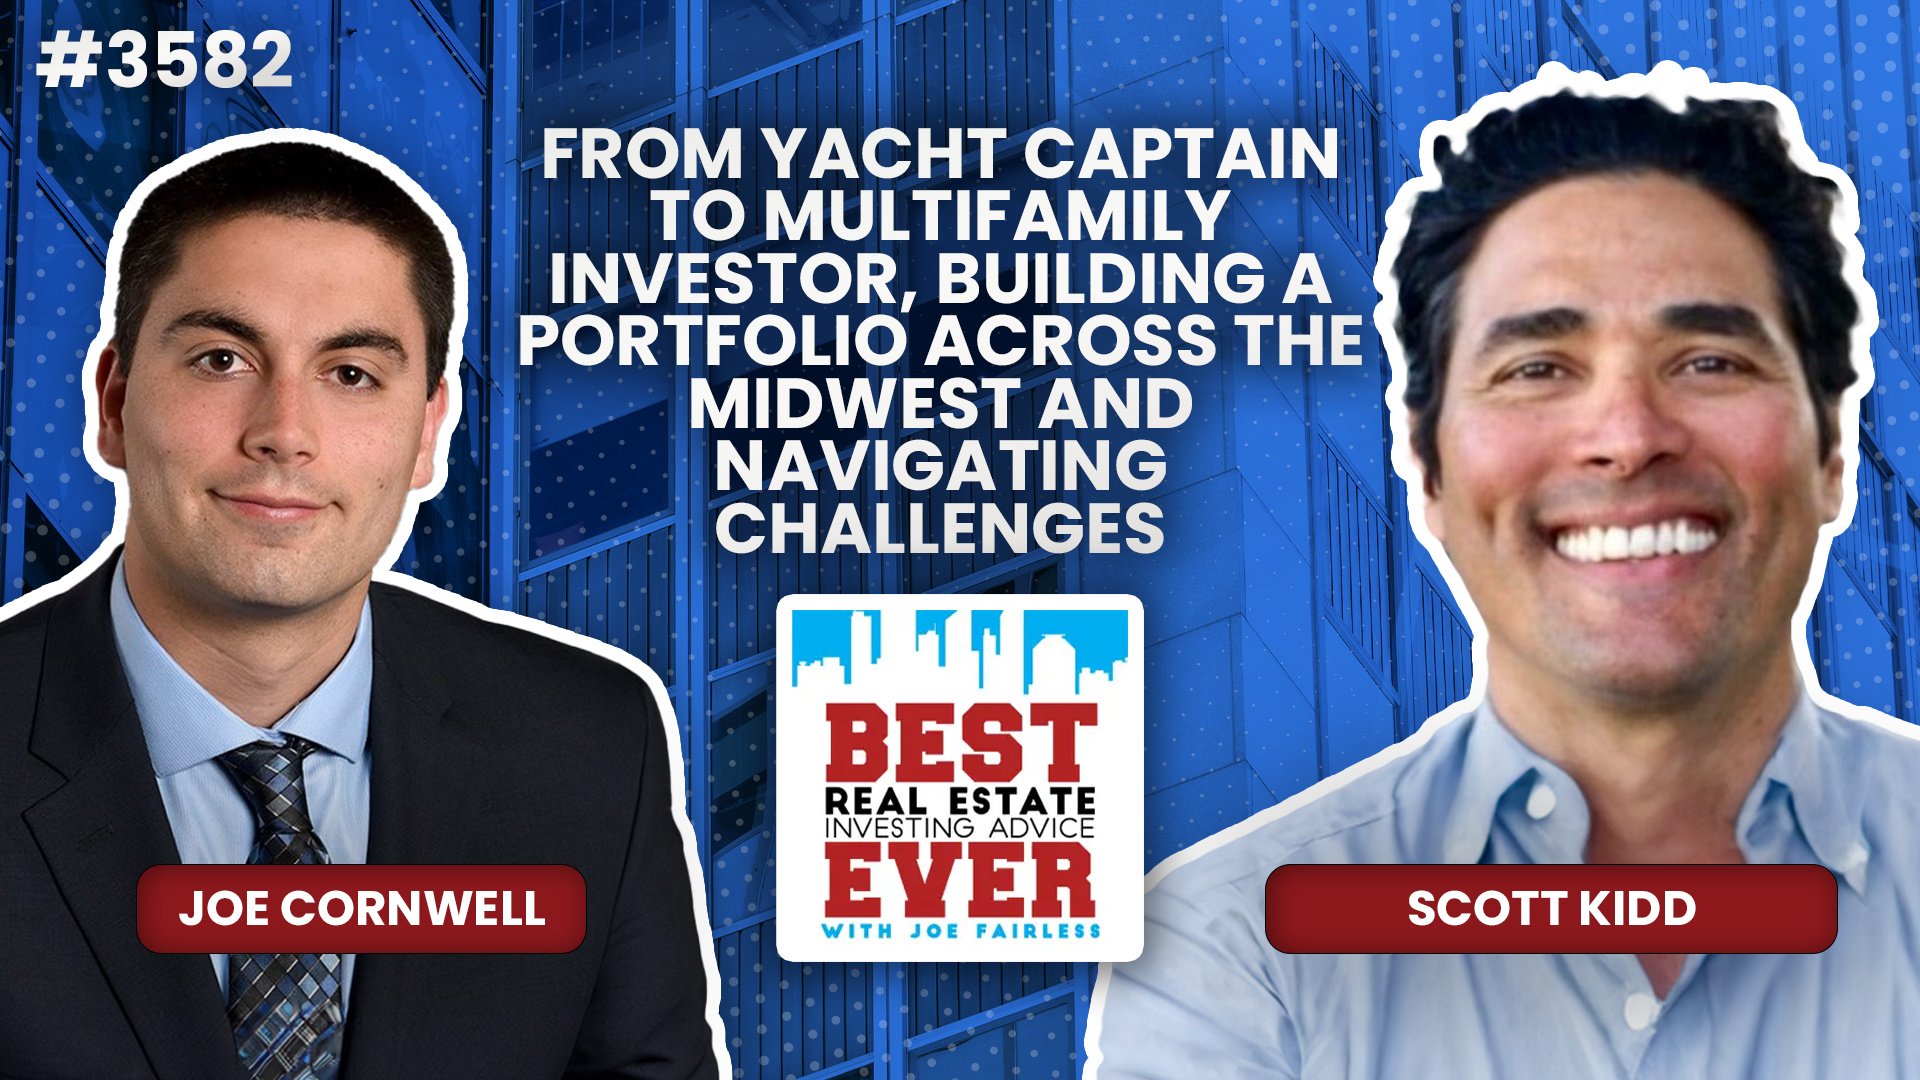 JF3582: From Yacht Captain to Multifamily Investor, Building a Portfolio Across the Midwest and Navigating Challenges ft. Scott Kidd